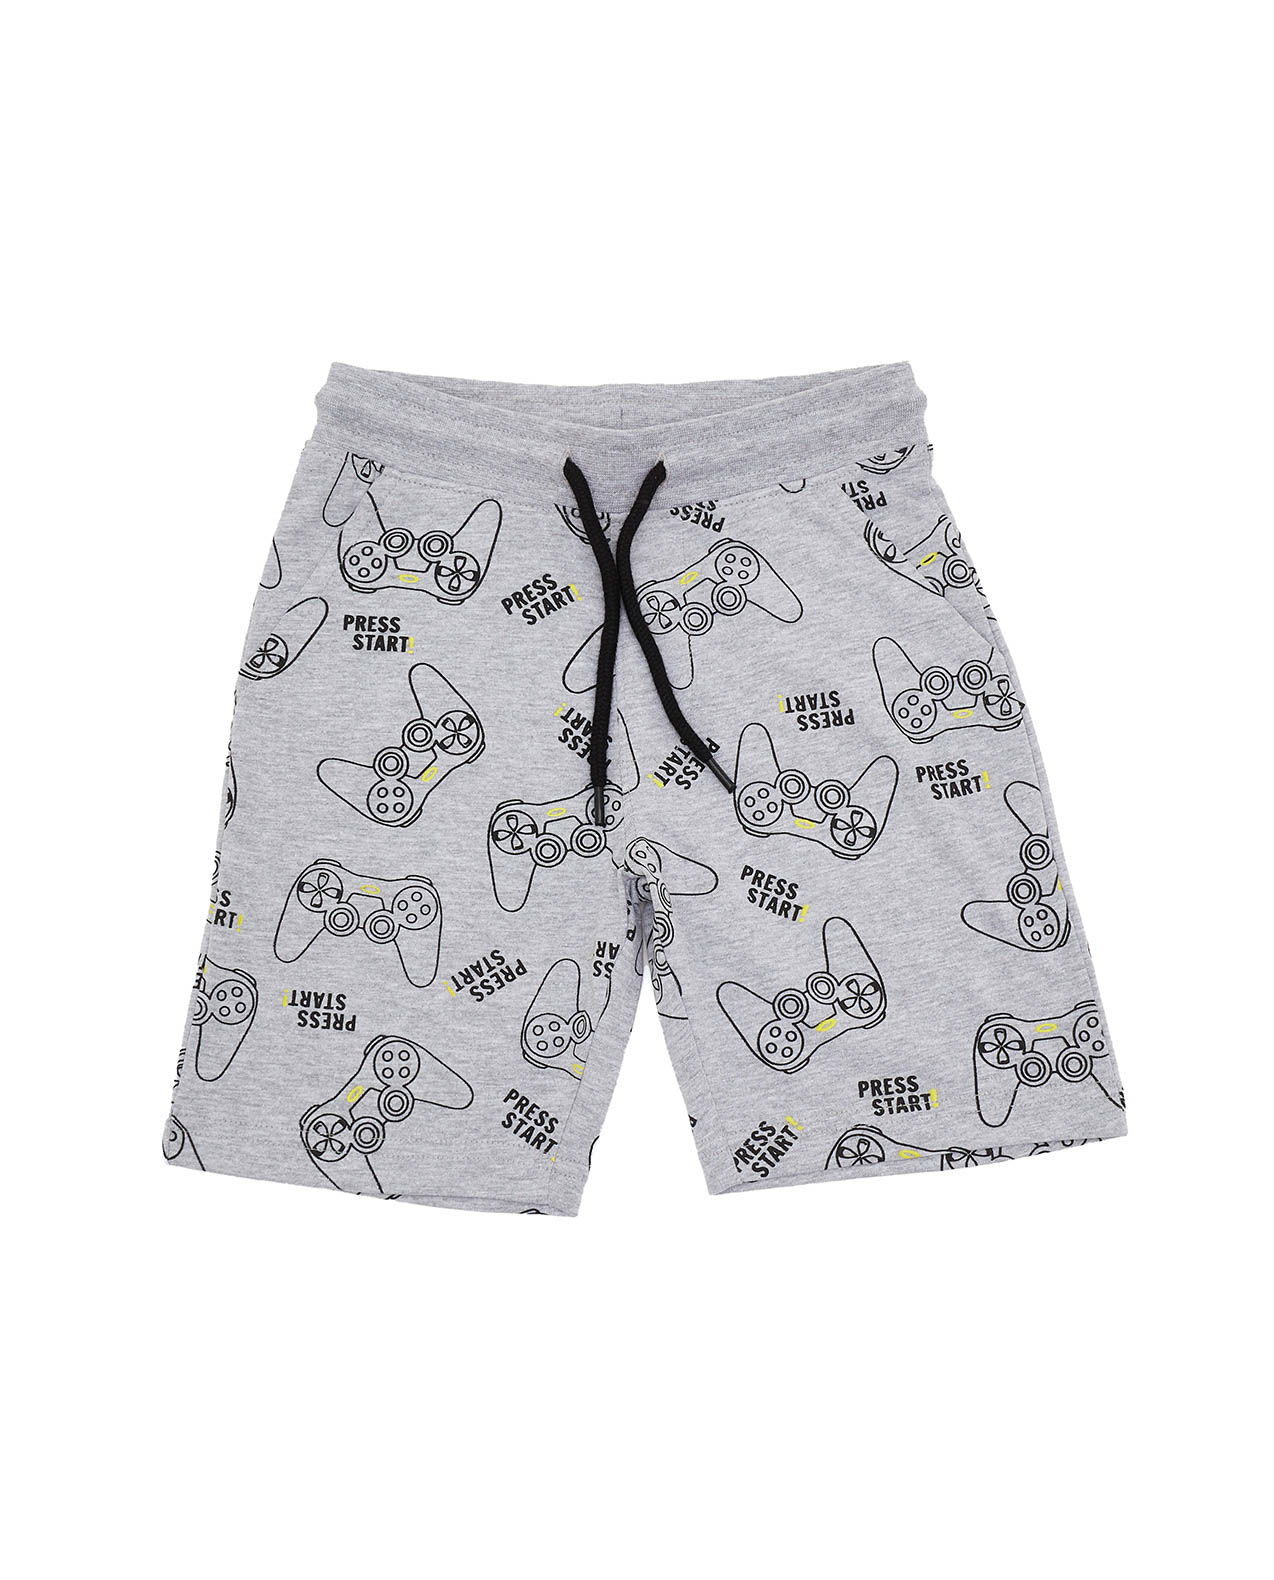 Pack of 2 Printed Shorts with Drawstring Waist